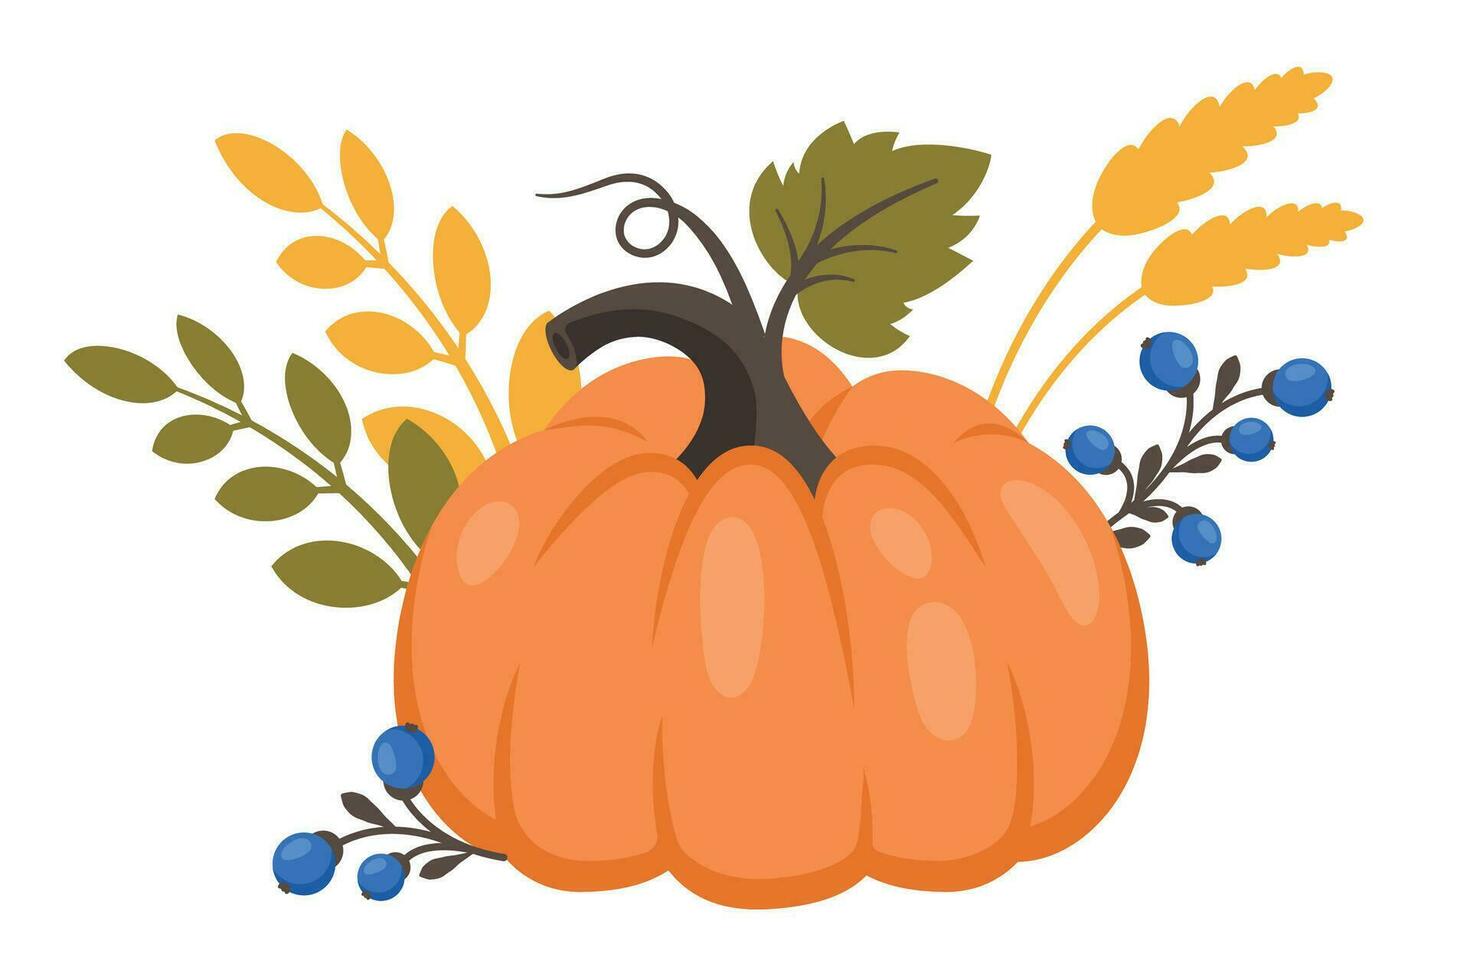 Autumn harwest. Ripe Whole pumpkin with fall leaves, wheat, berries. Nature vegetables, healthy and farm food. Vector illustration for fall design, good nutrition, agricultural harvest, Thanksgiving